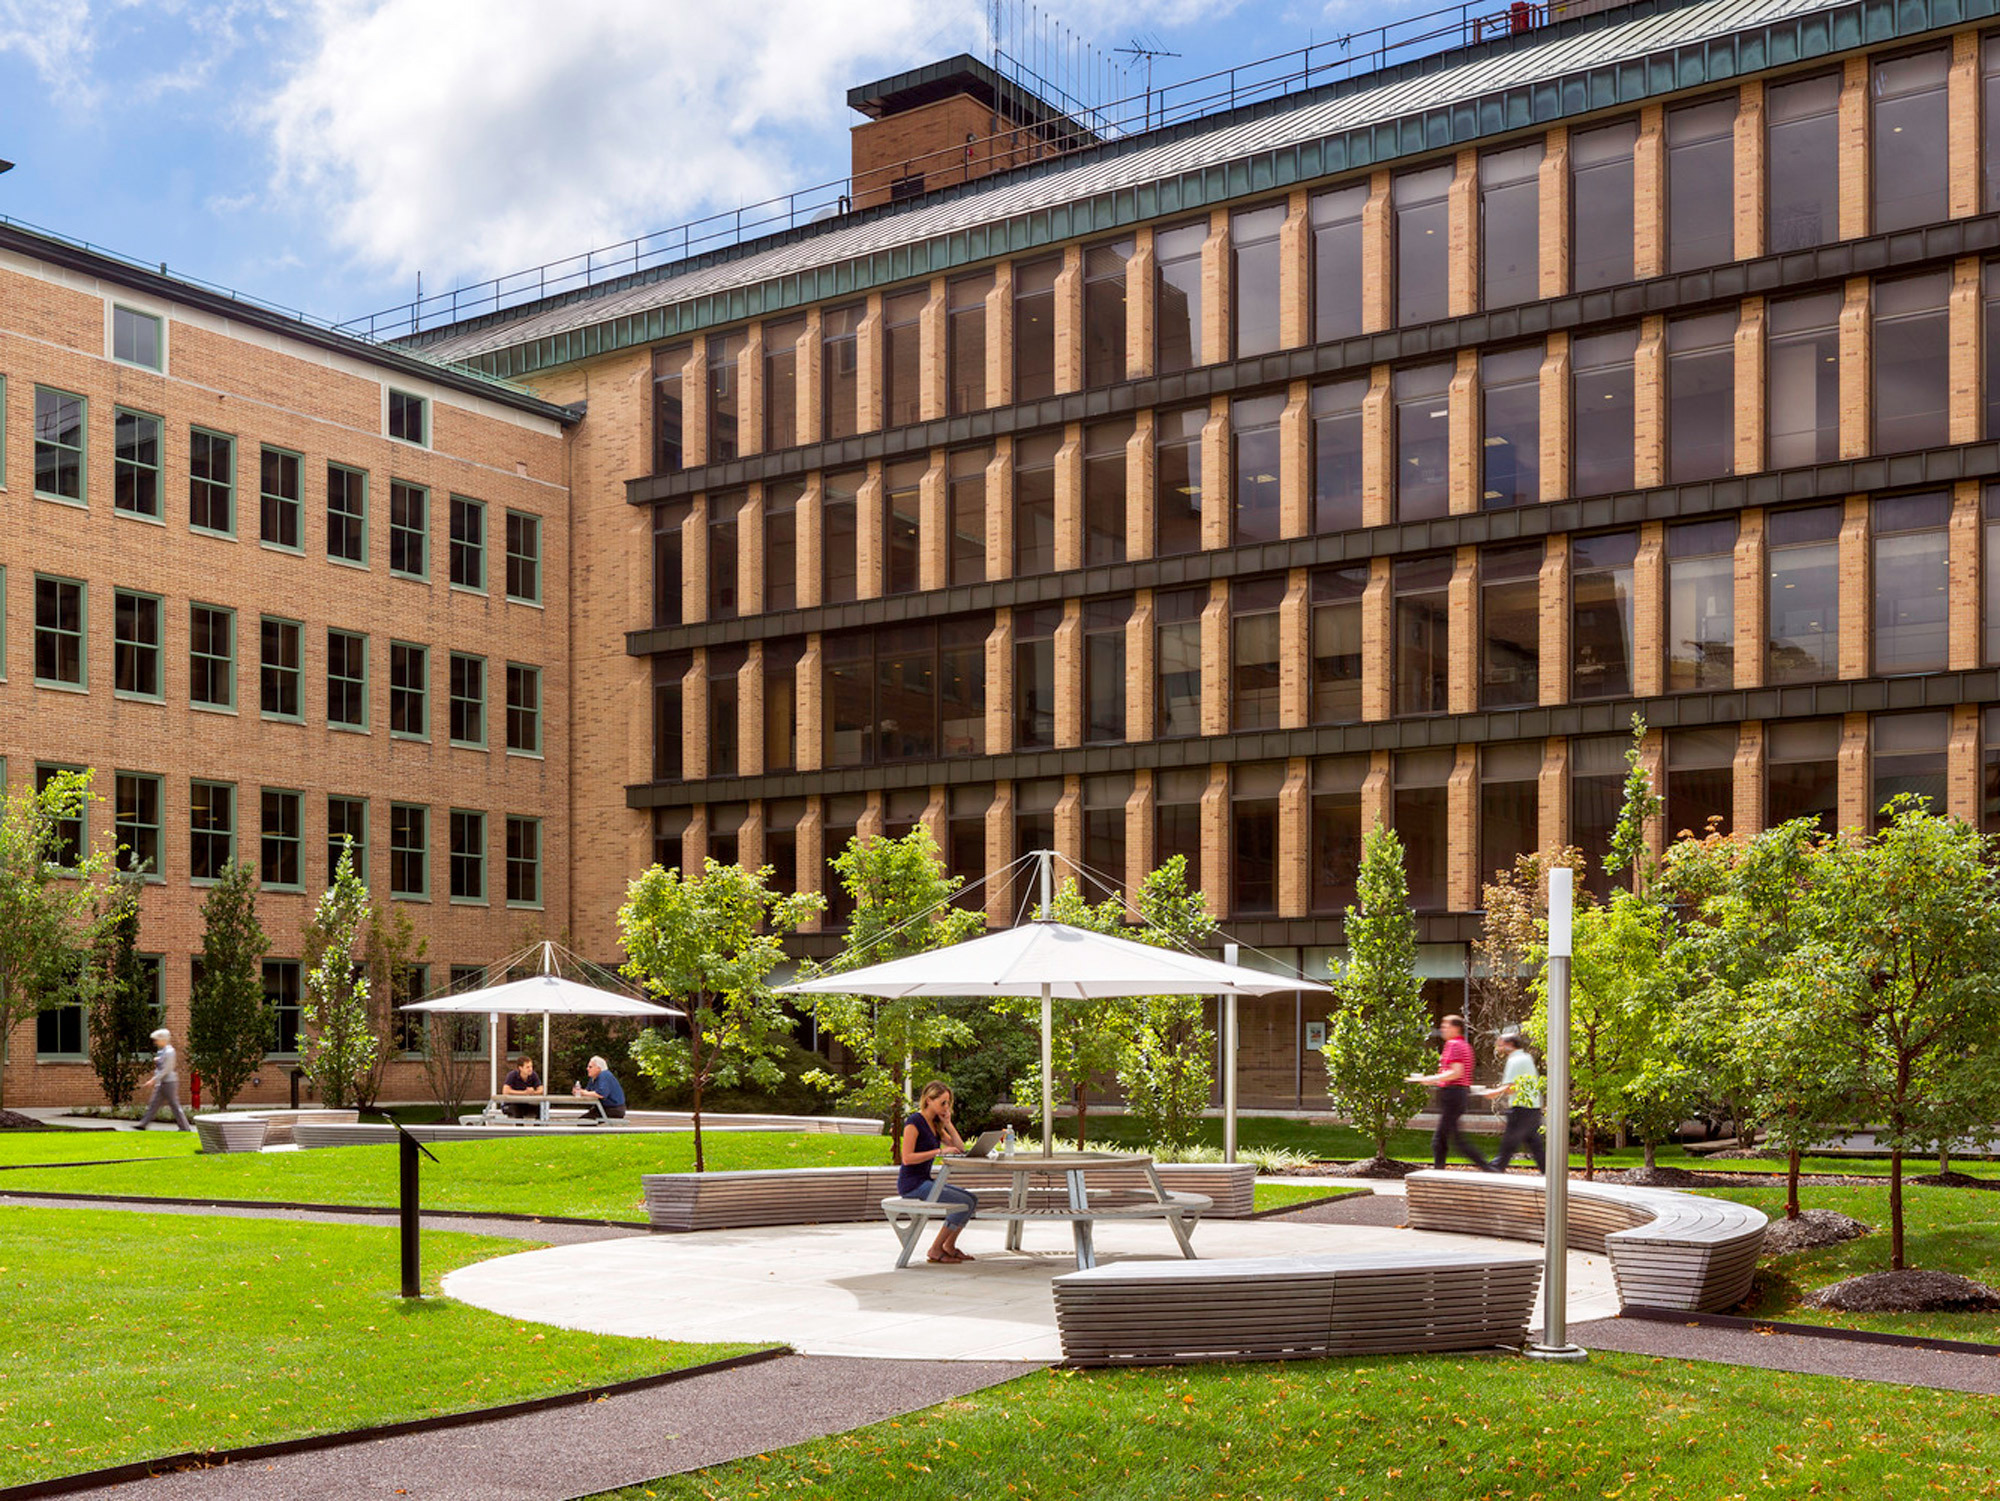 Modern university courtyard showcasing a blend of natural and architectural design, with students occupying benches and tables beneath white parasols, framed by a lush green lawn and a multi-story academic building with brick and glass facade.